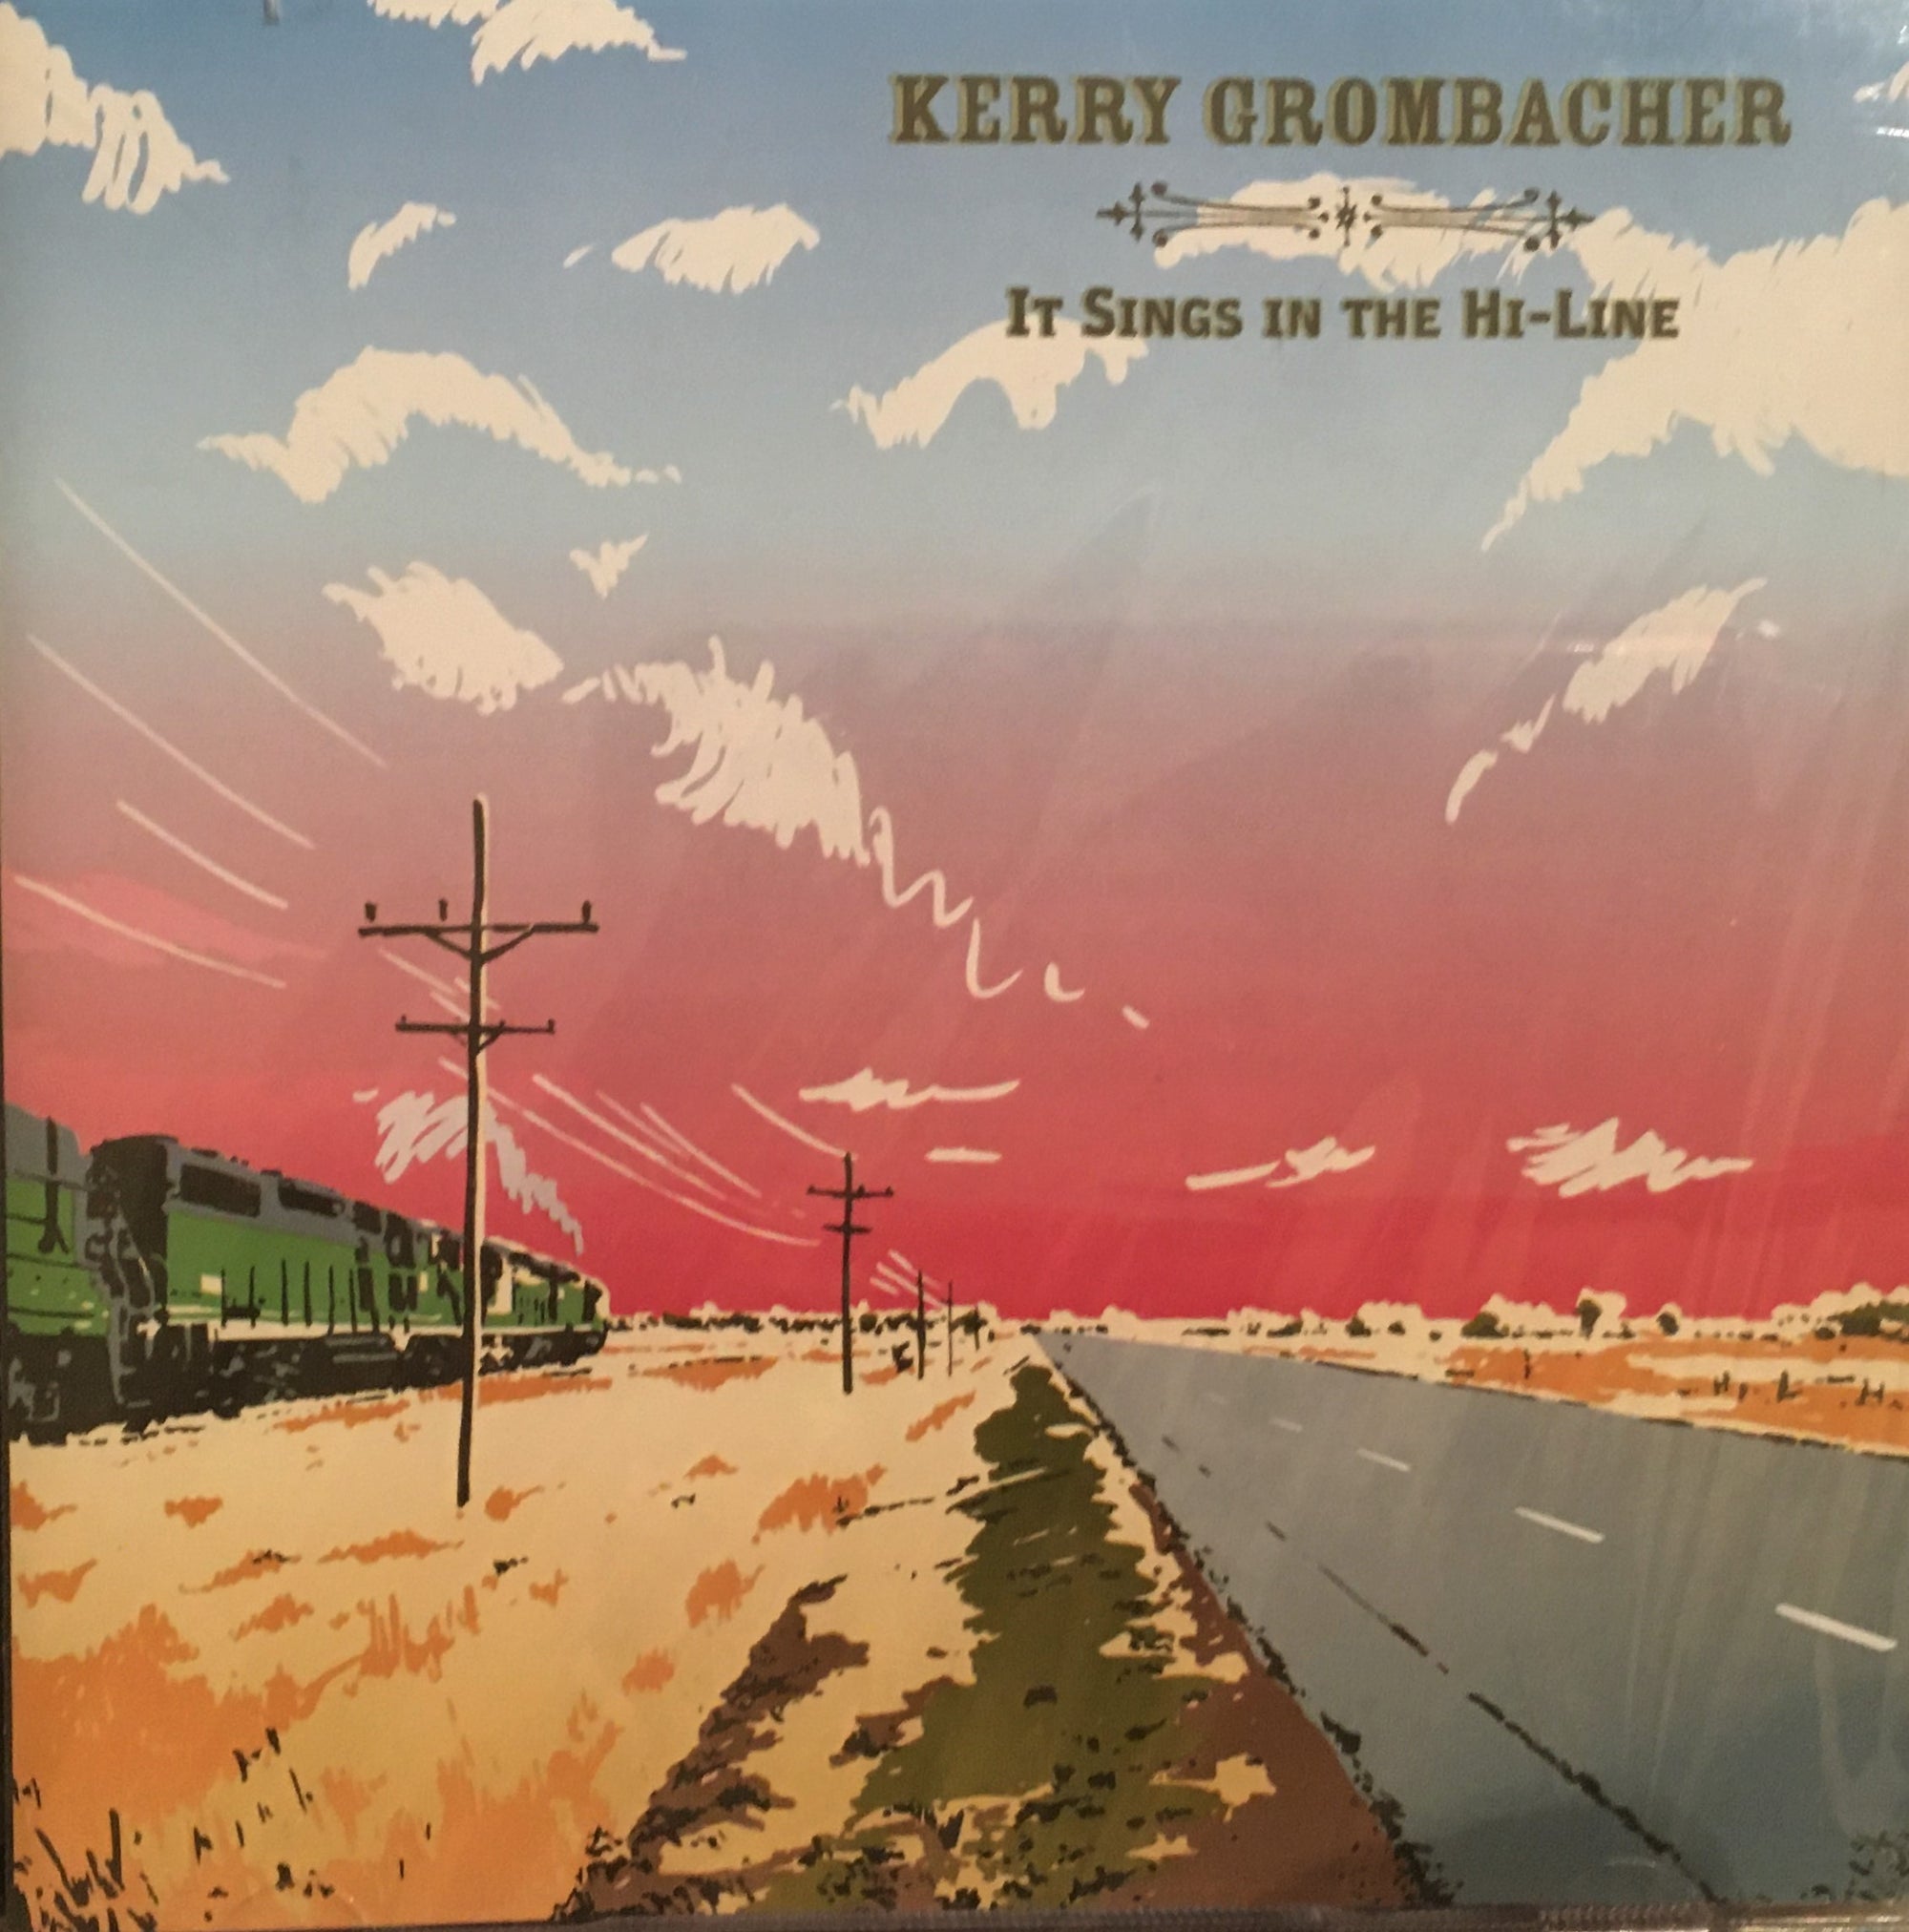 CD It Sings In The Hi-Line by Kerry Grombacher